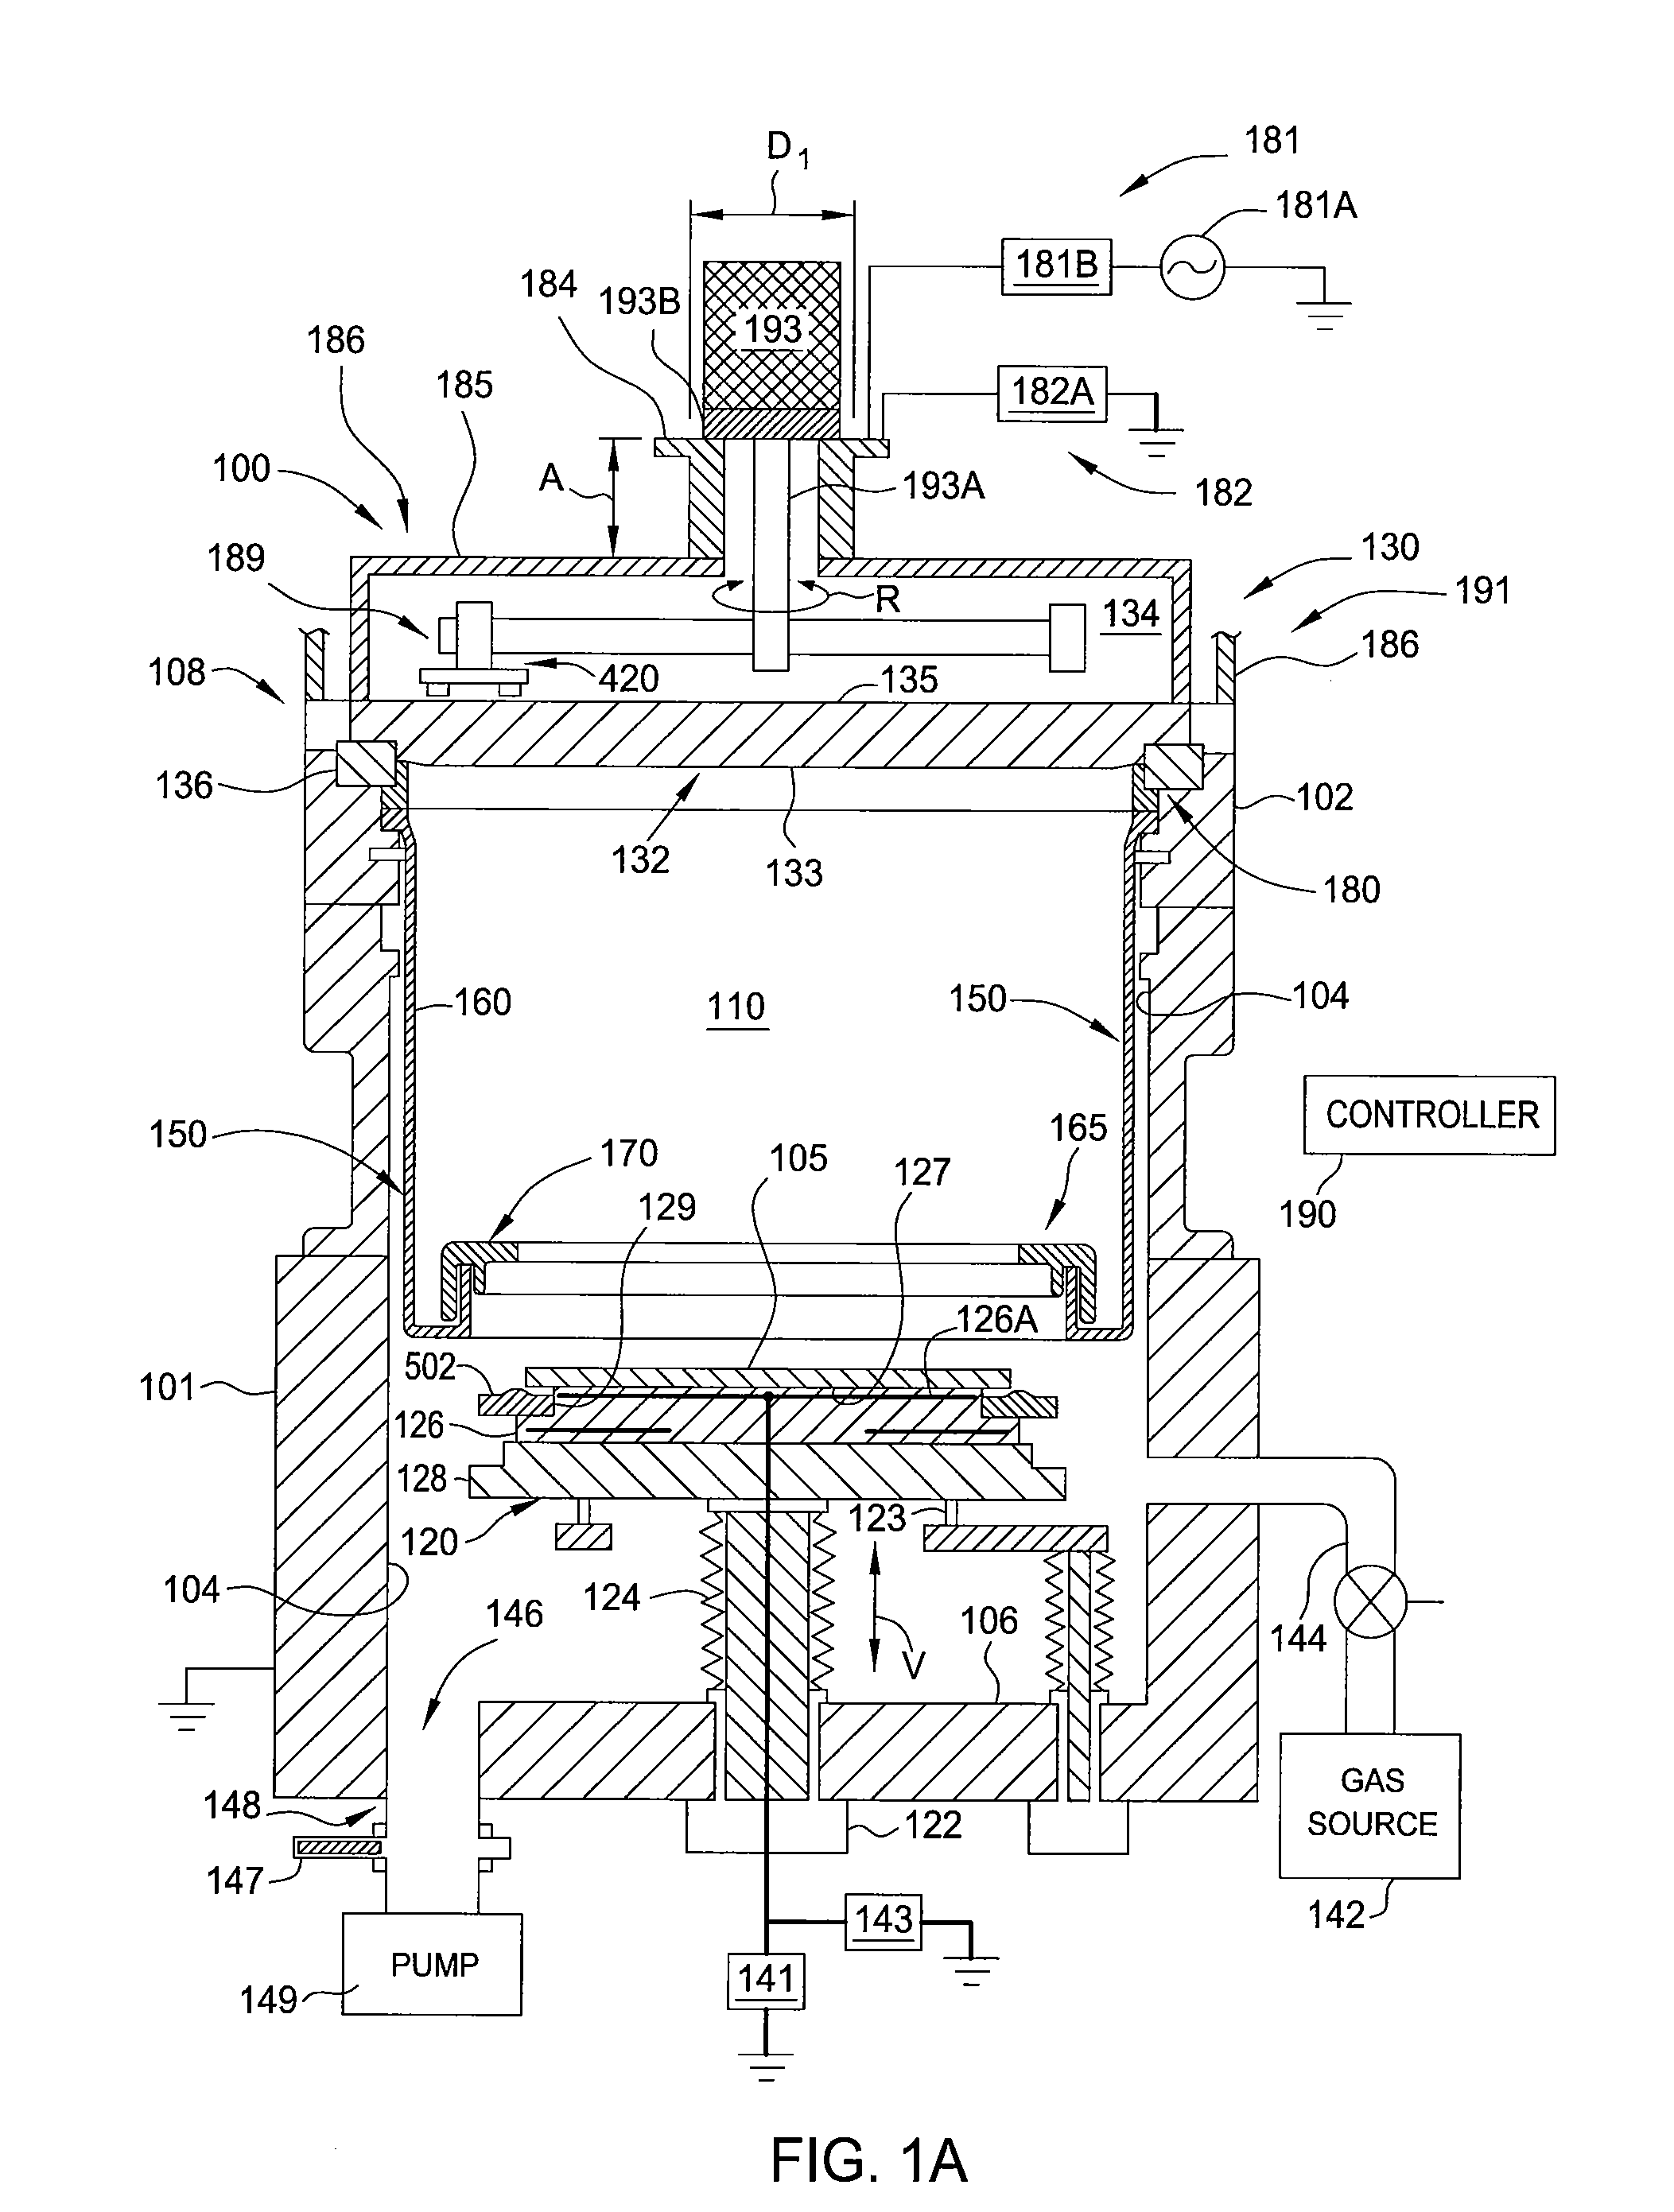 High pressure rf-dc sputtering and methods to improve film uniformity and step-coverage of this process